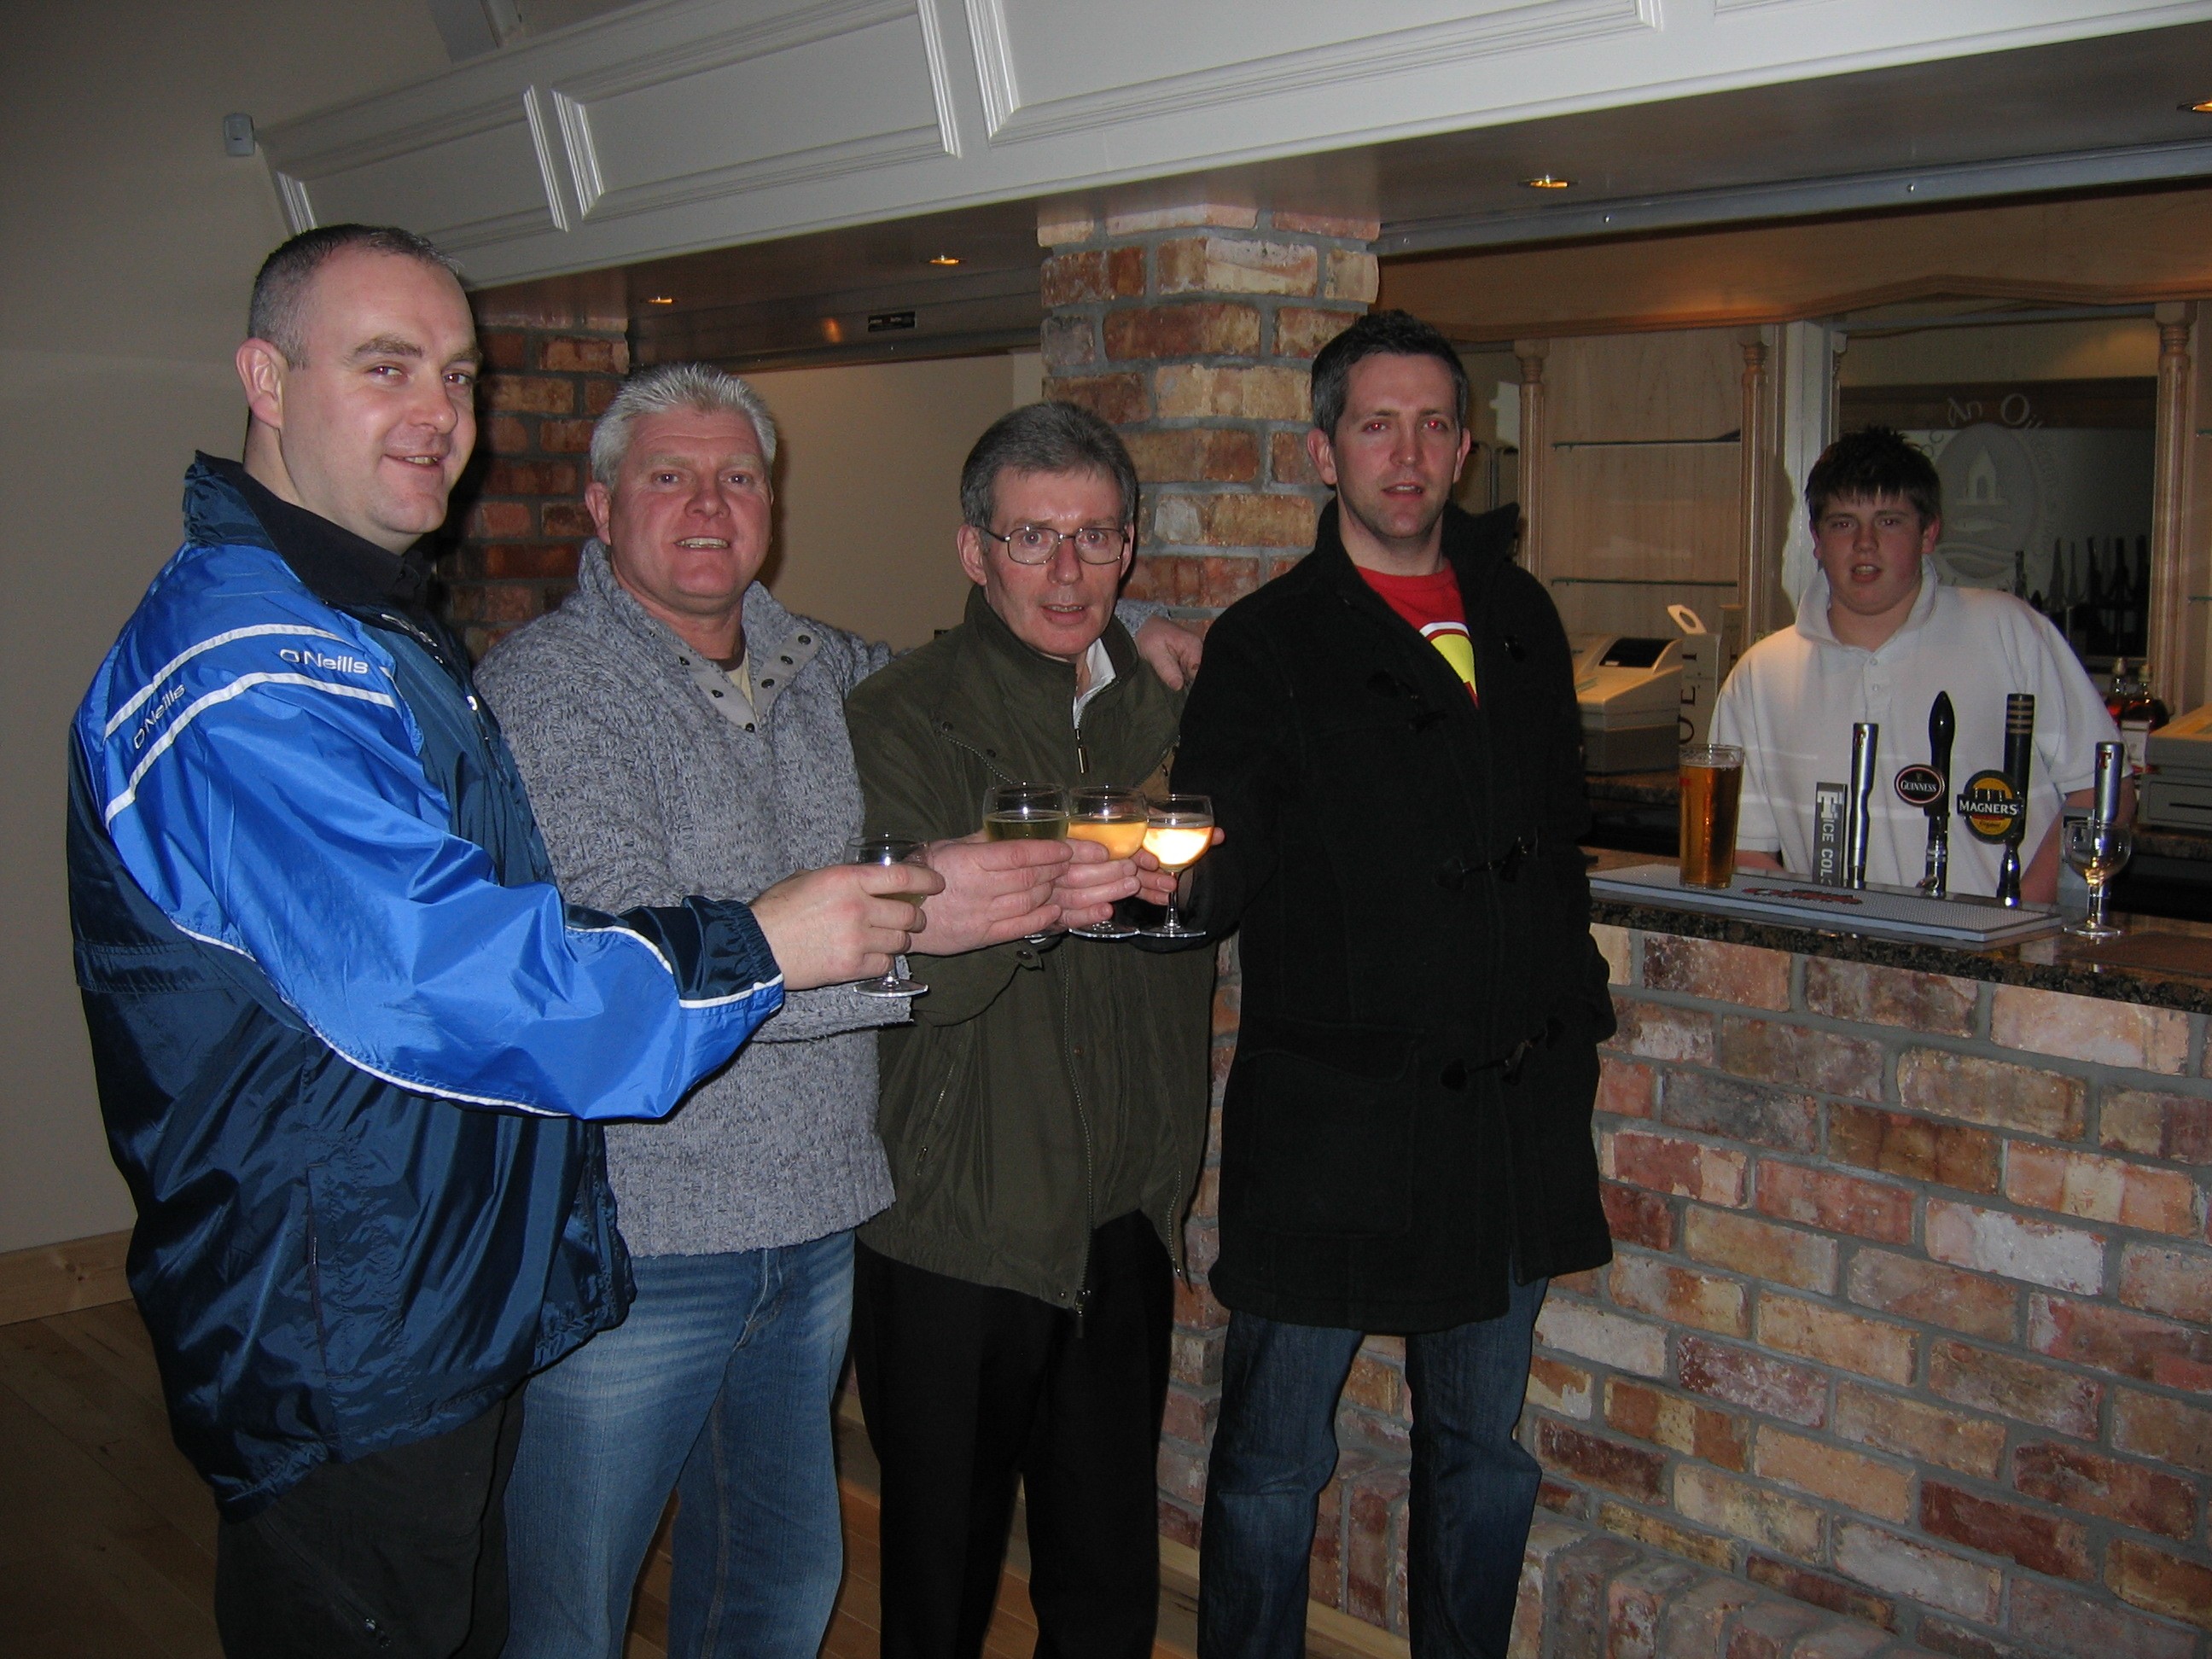 Enjoying their first drink in the new clubhouse in Loughinisland, Co. Down, December 2007.